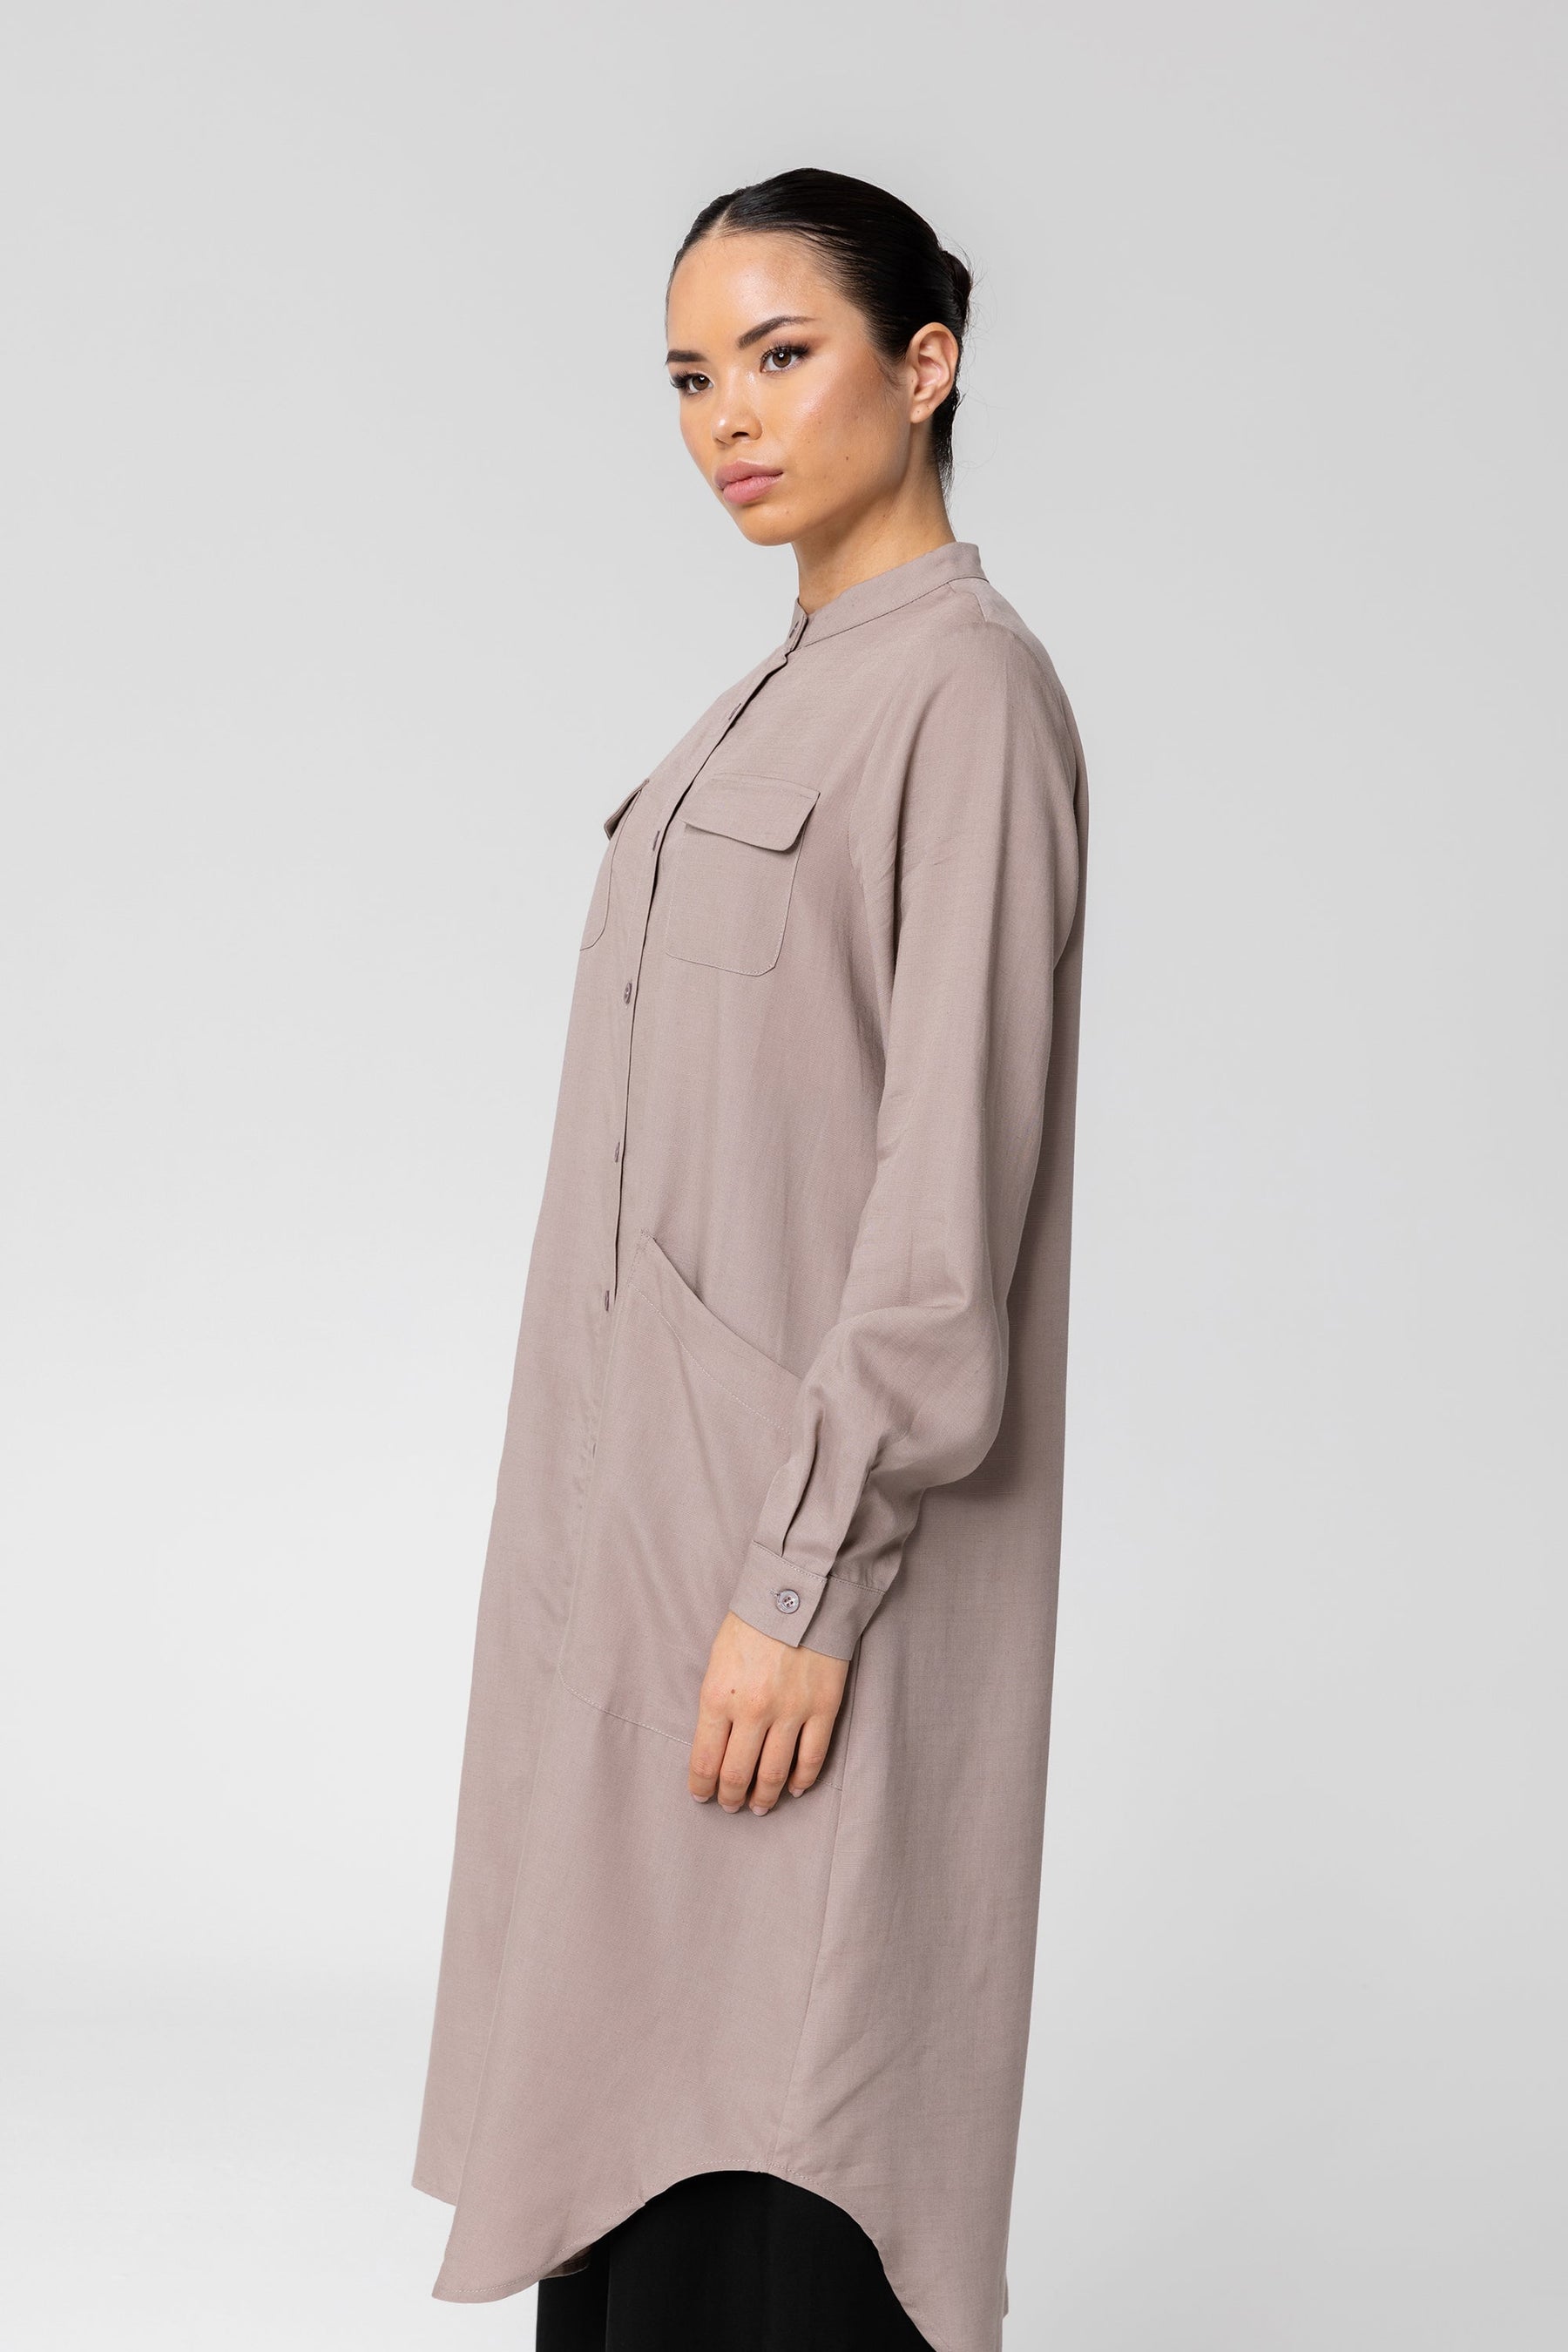 Nadine Cotton Linen Button Down Utility Tunic - Taupe Veiled Collection 